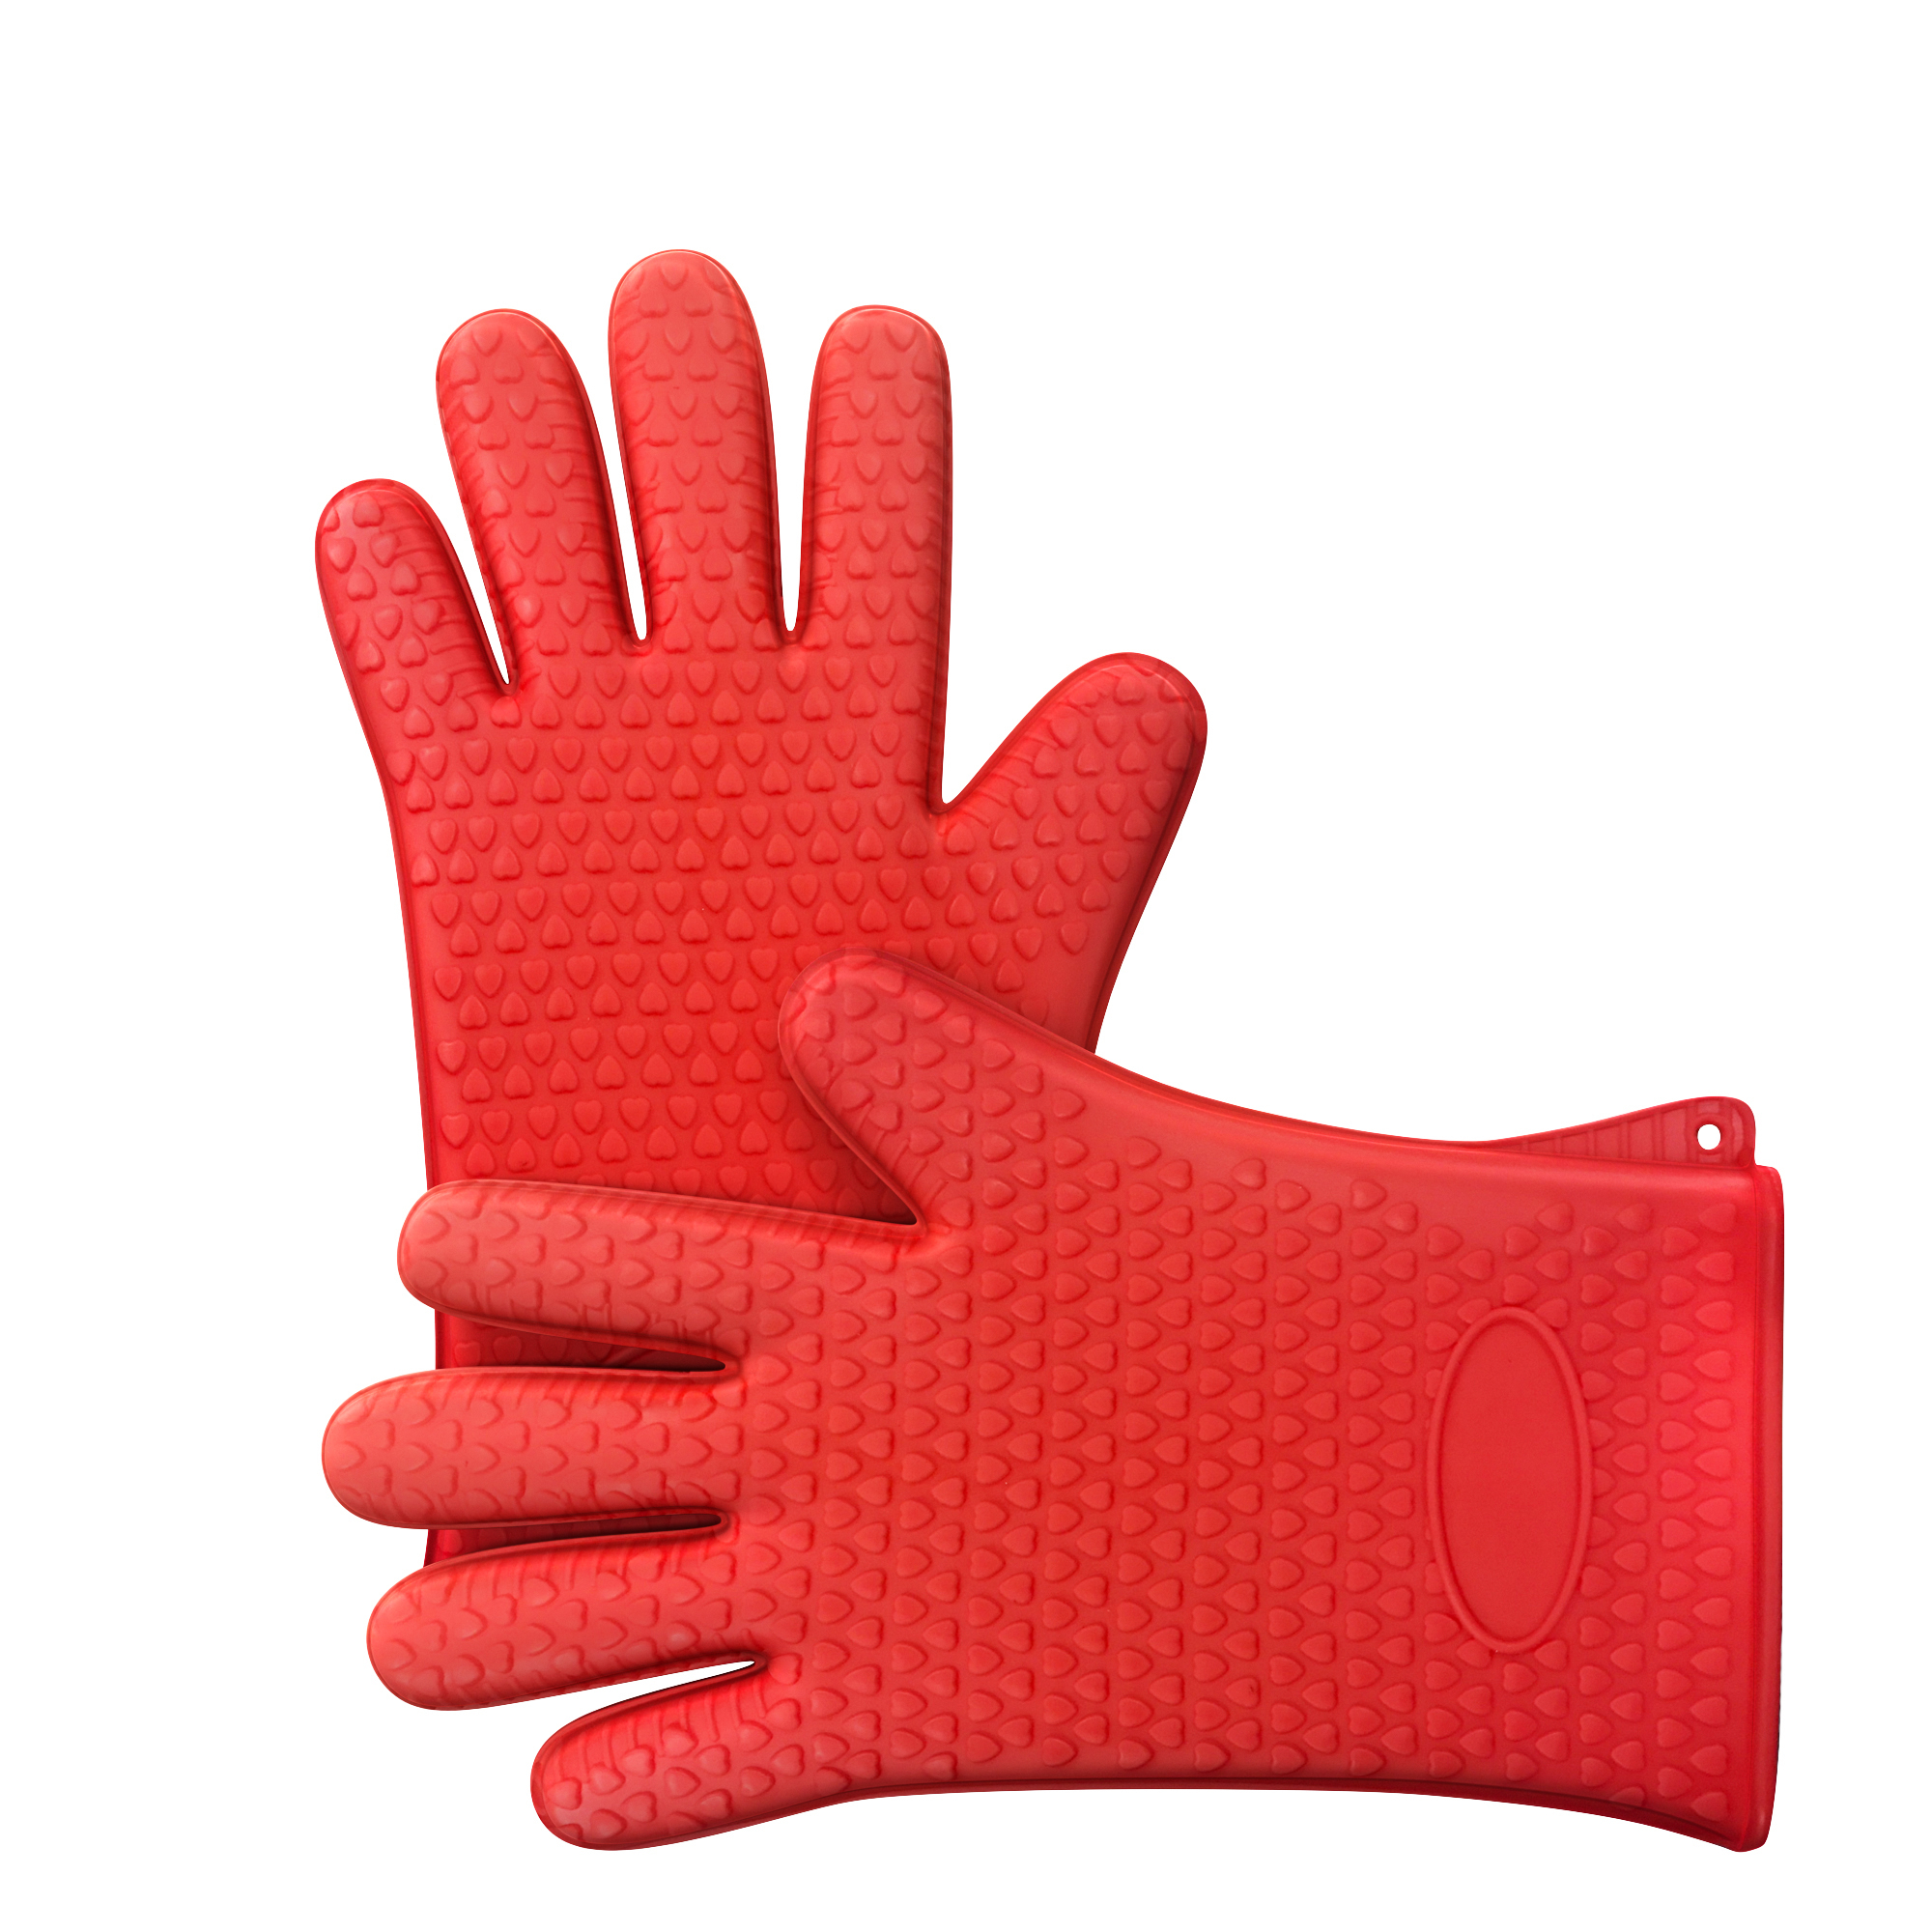 Silicone Oven Mitts Gloves Safe Non Slip Grip Heat Resistant Pot Holders 1 Pair